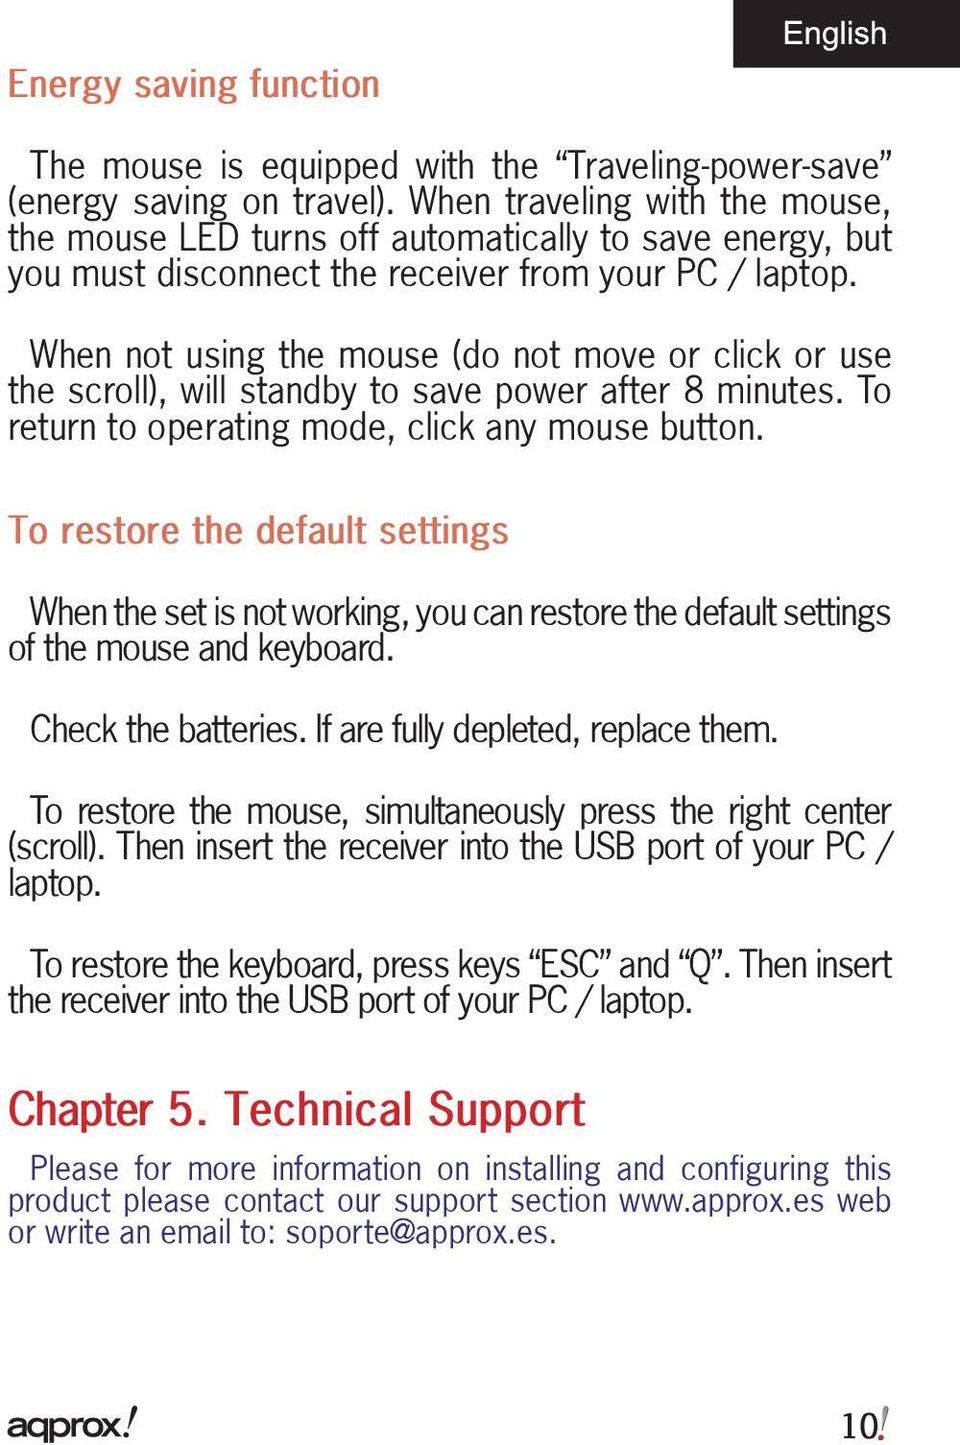 When not using the mouse (do not move or click or use the scroll), will standby to save power after 8 minutes. To return to operating mode, click any mouse button.